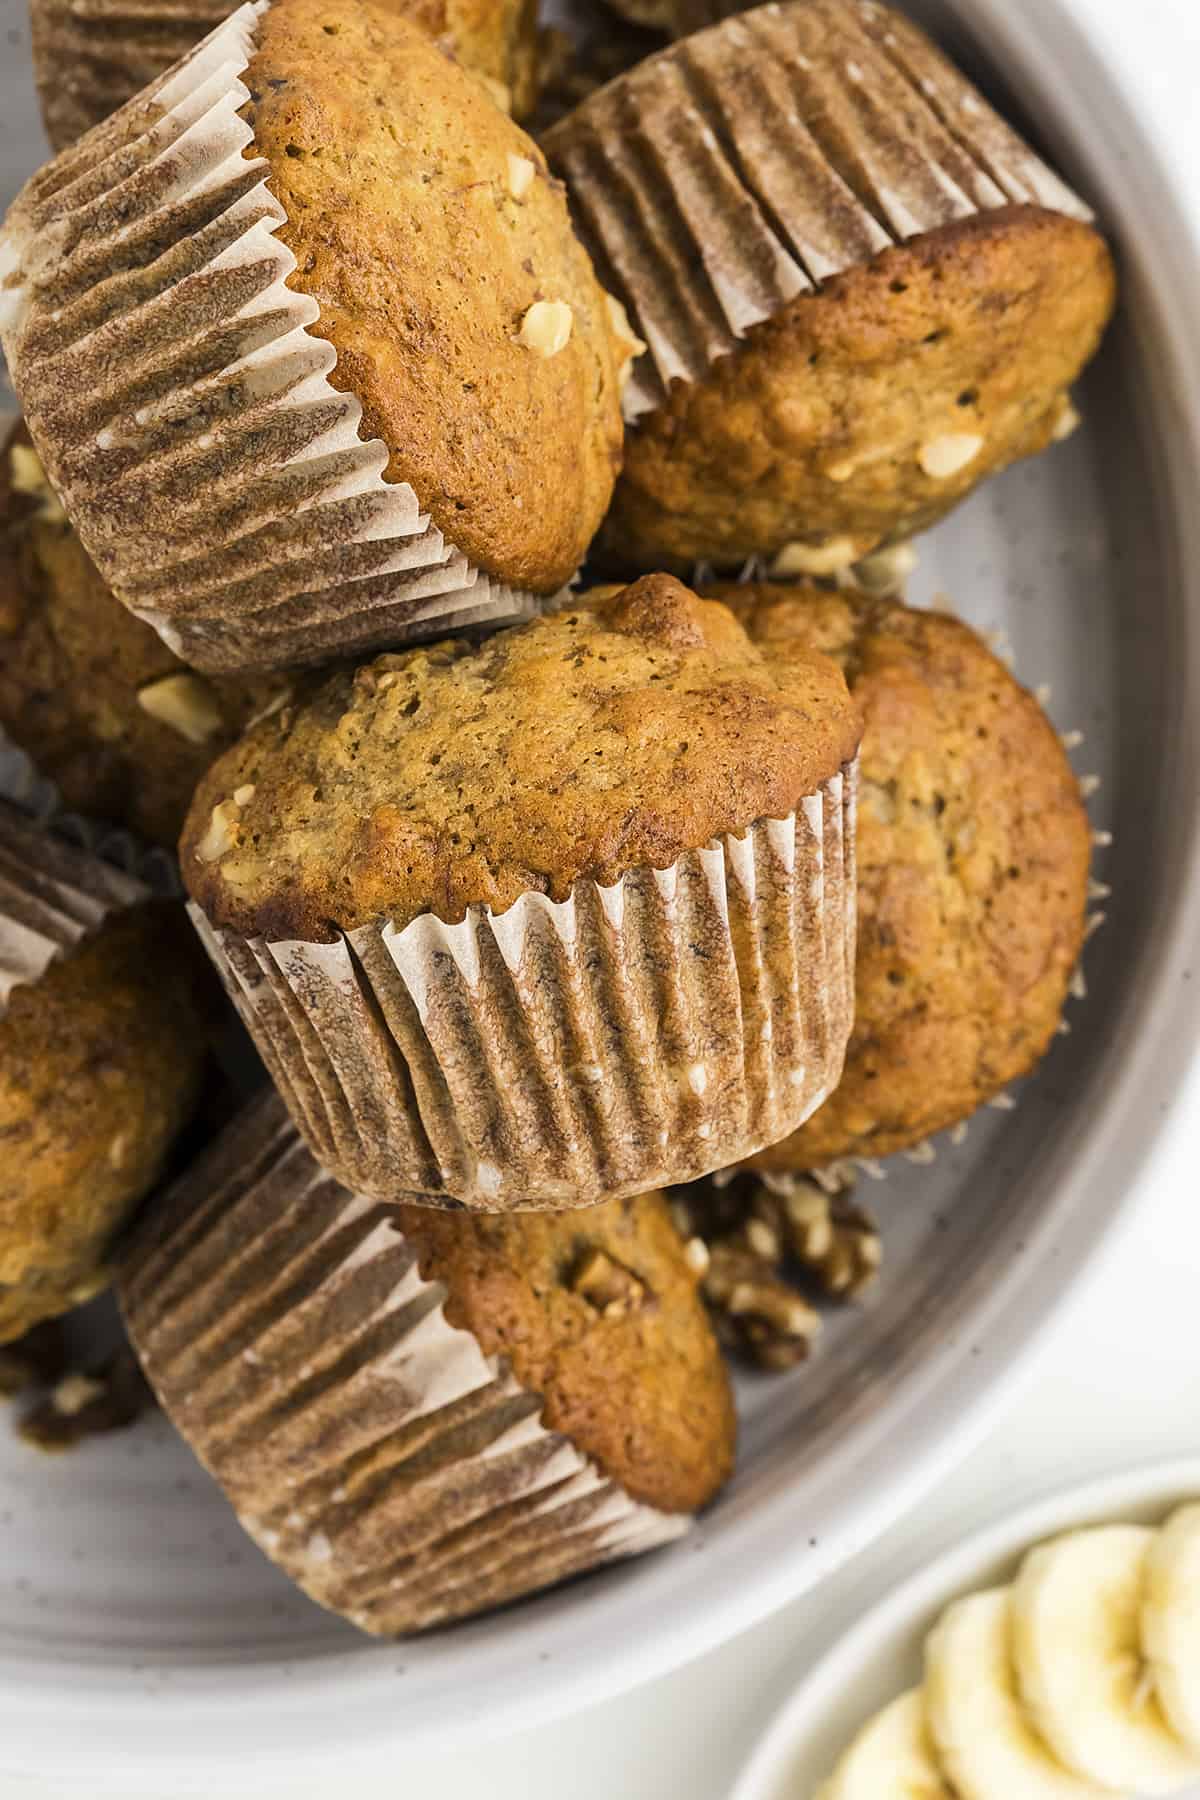 Banana bread muffins piled together on plate.